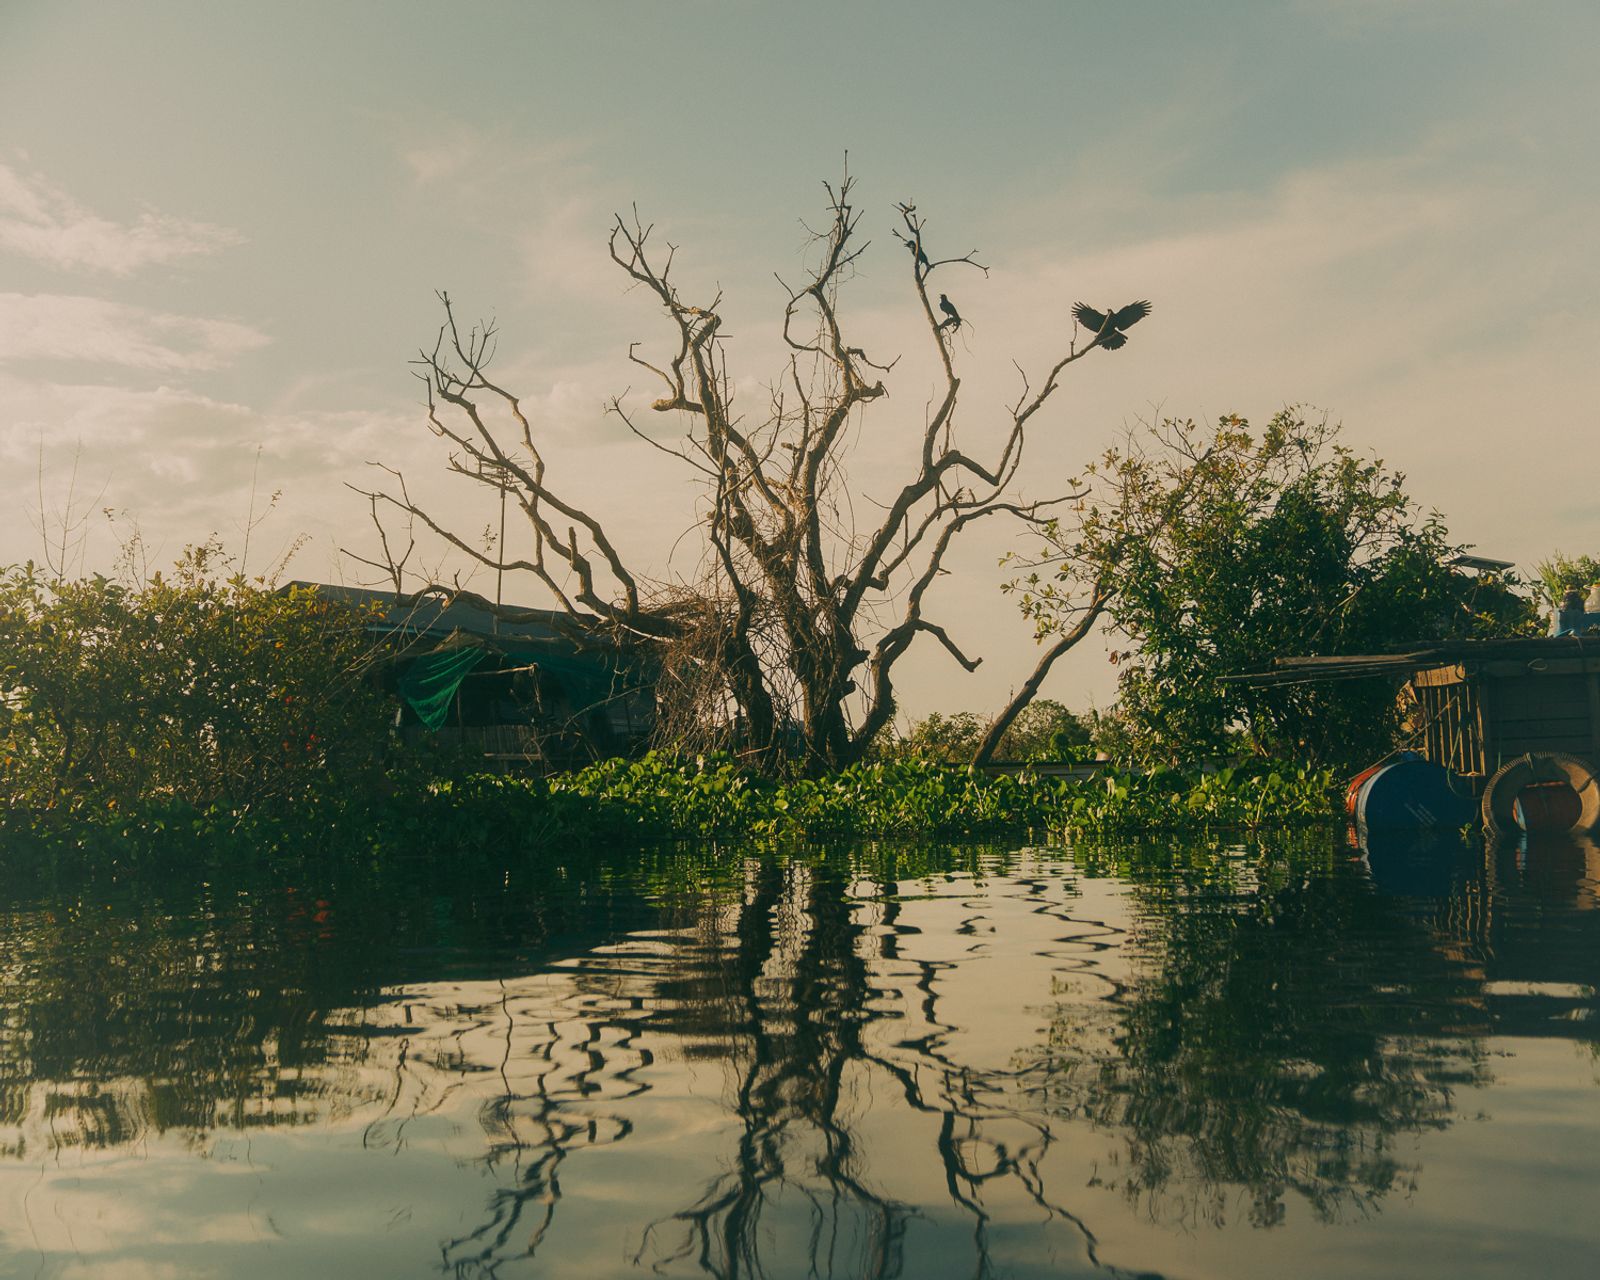 © Calvin Chow - [Untitled] Crows perch on a dead tree, Tonle Sap lake, Cambodia.